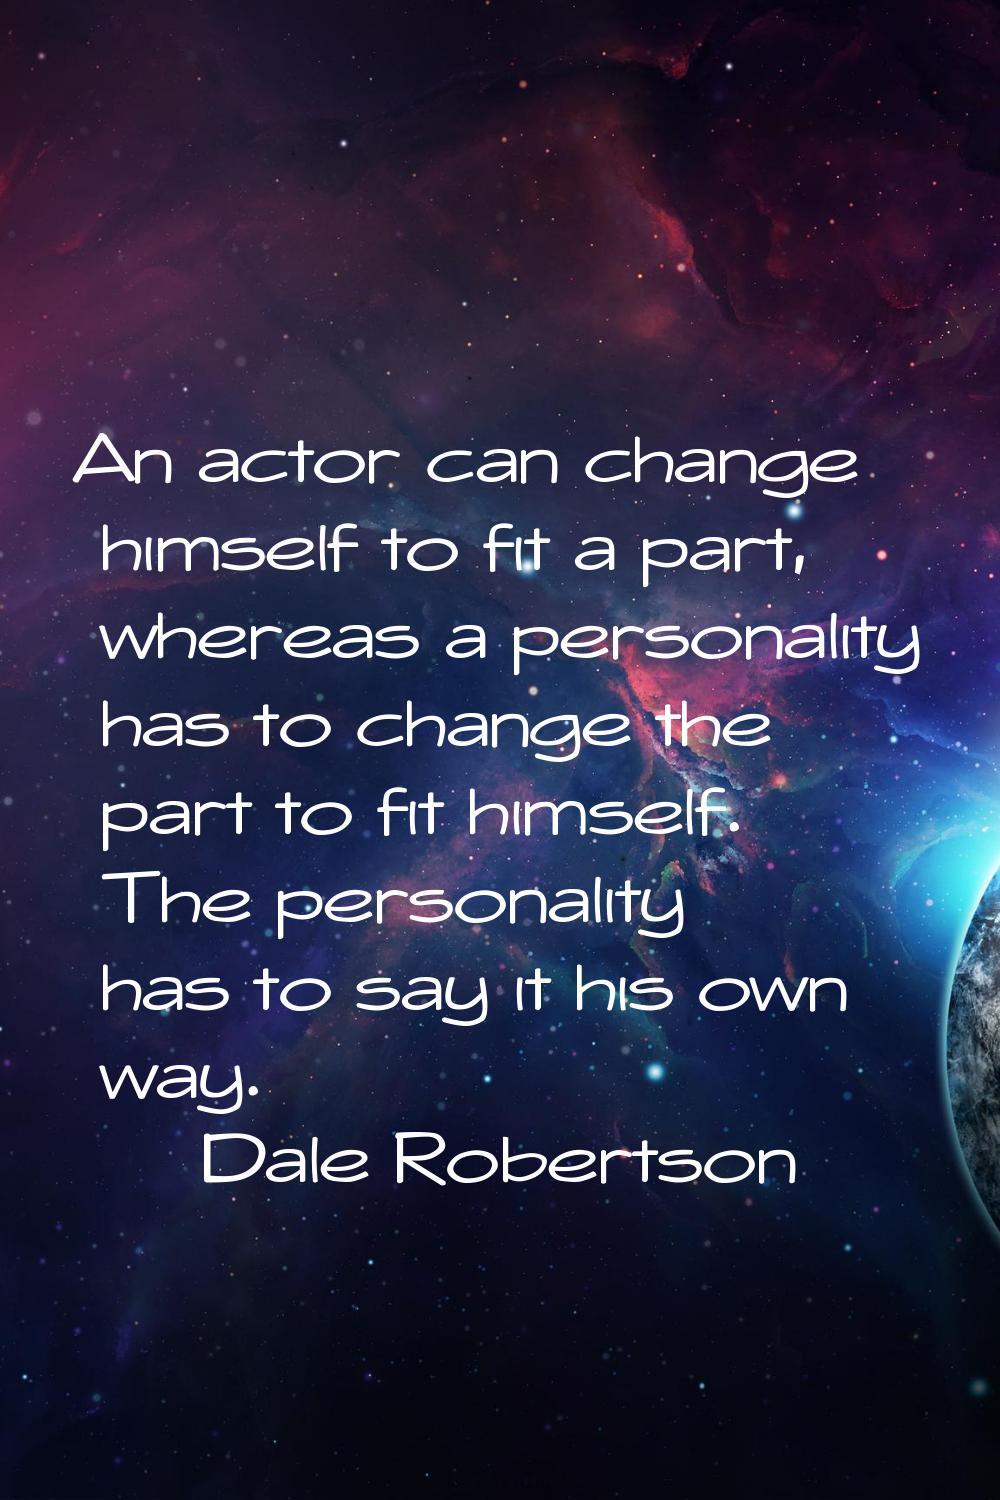 An actor can change himself to fit a part, whereas a personality has to change the part to fit hims